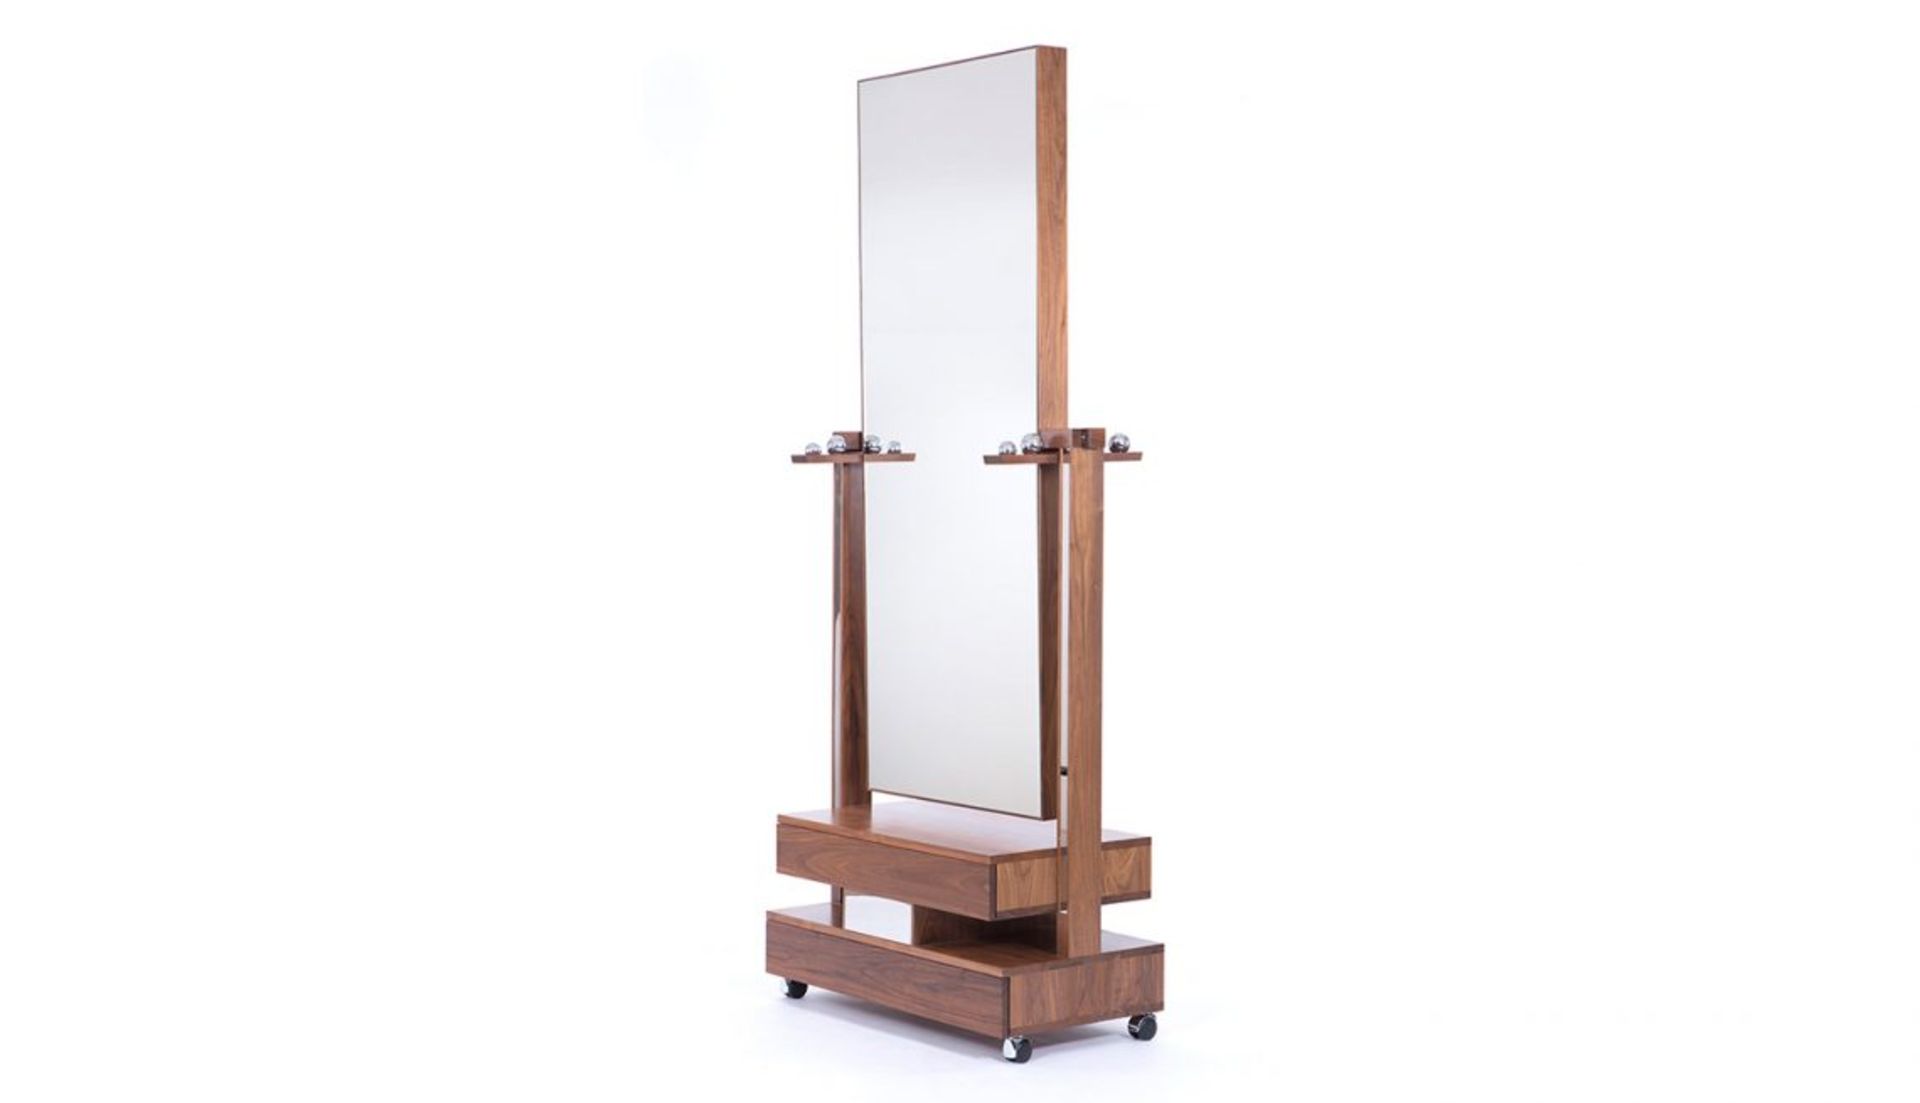 Grand Reversible Cheval Robing Mirror, American Black Walnut (Retail £12,495)(Located at 155